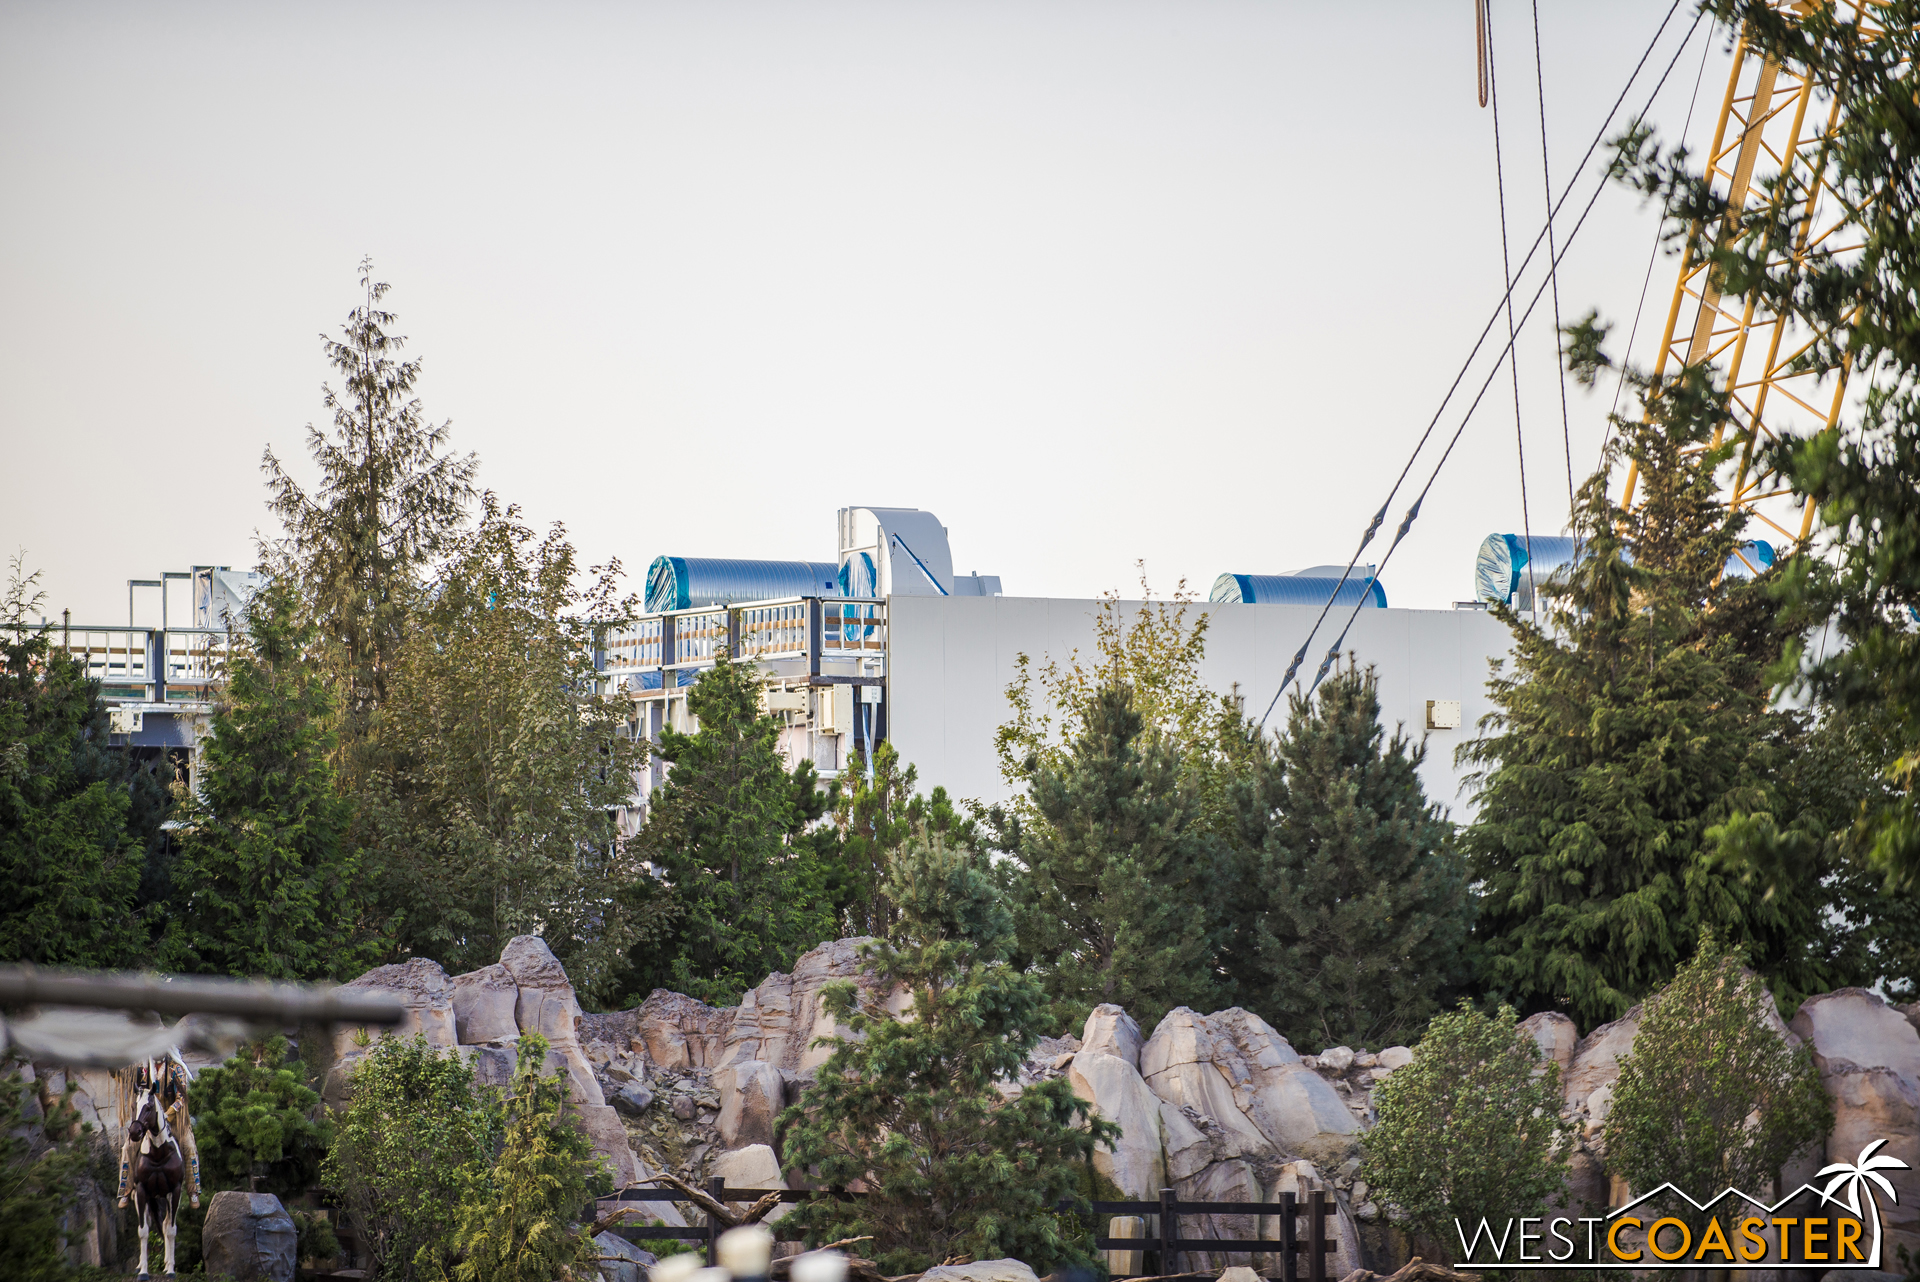  Wall panels have been going up on this side too. &nbsp;I wonder if Disney will bother concealing them behind rockwork later too. &nbsp;This is an elevated view that most guests won't notice, but it will be visible for anyone on an elevated portion o